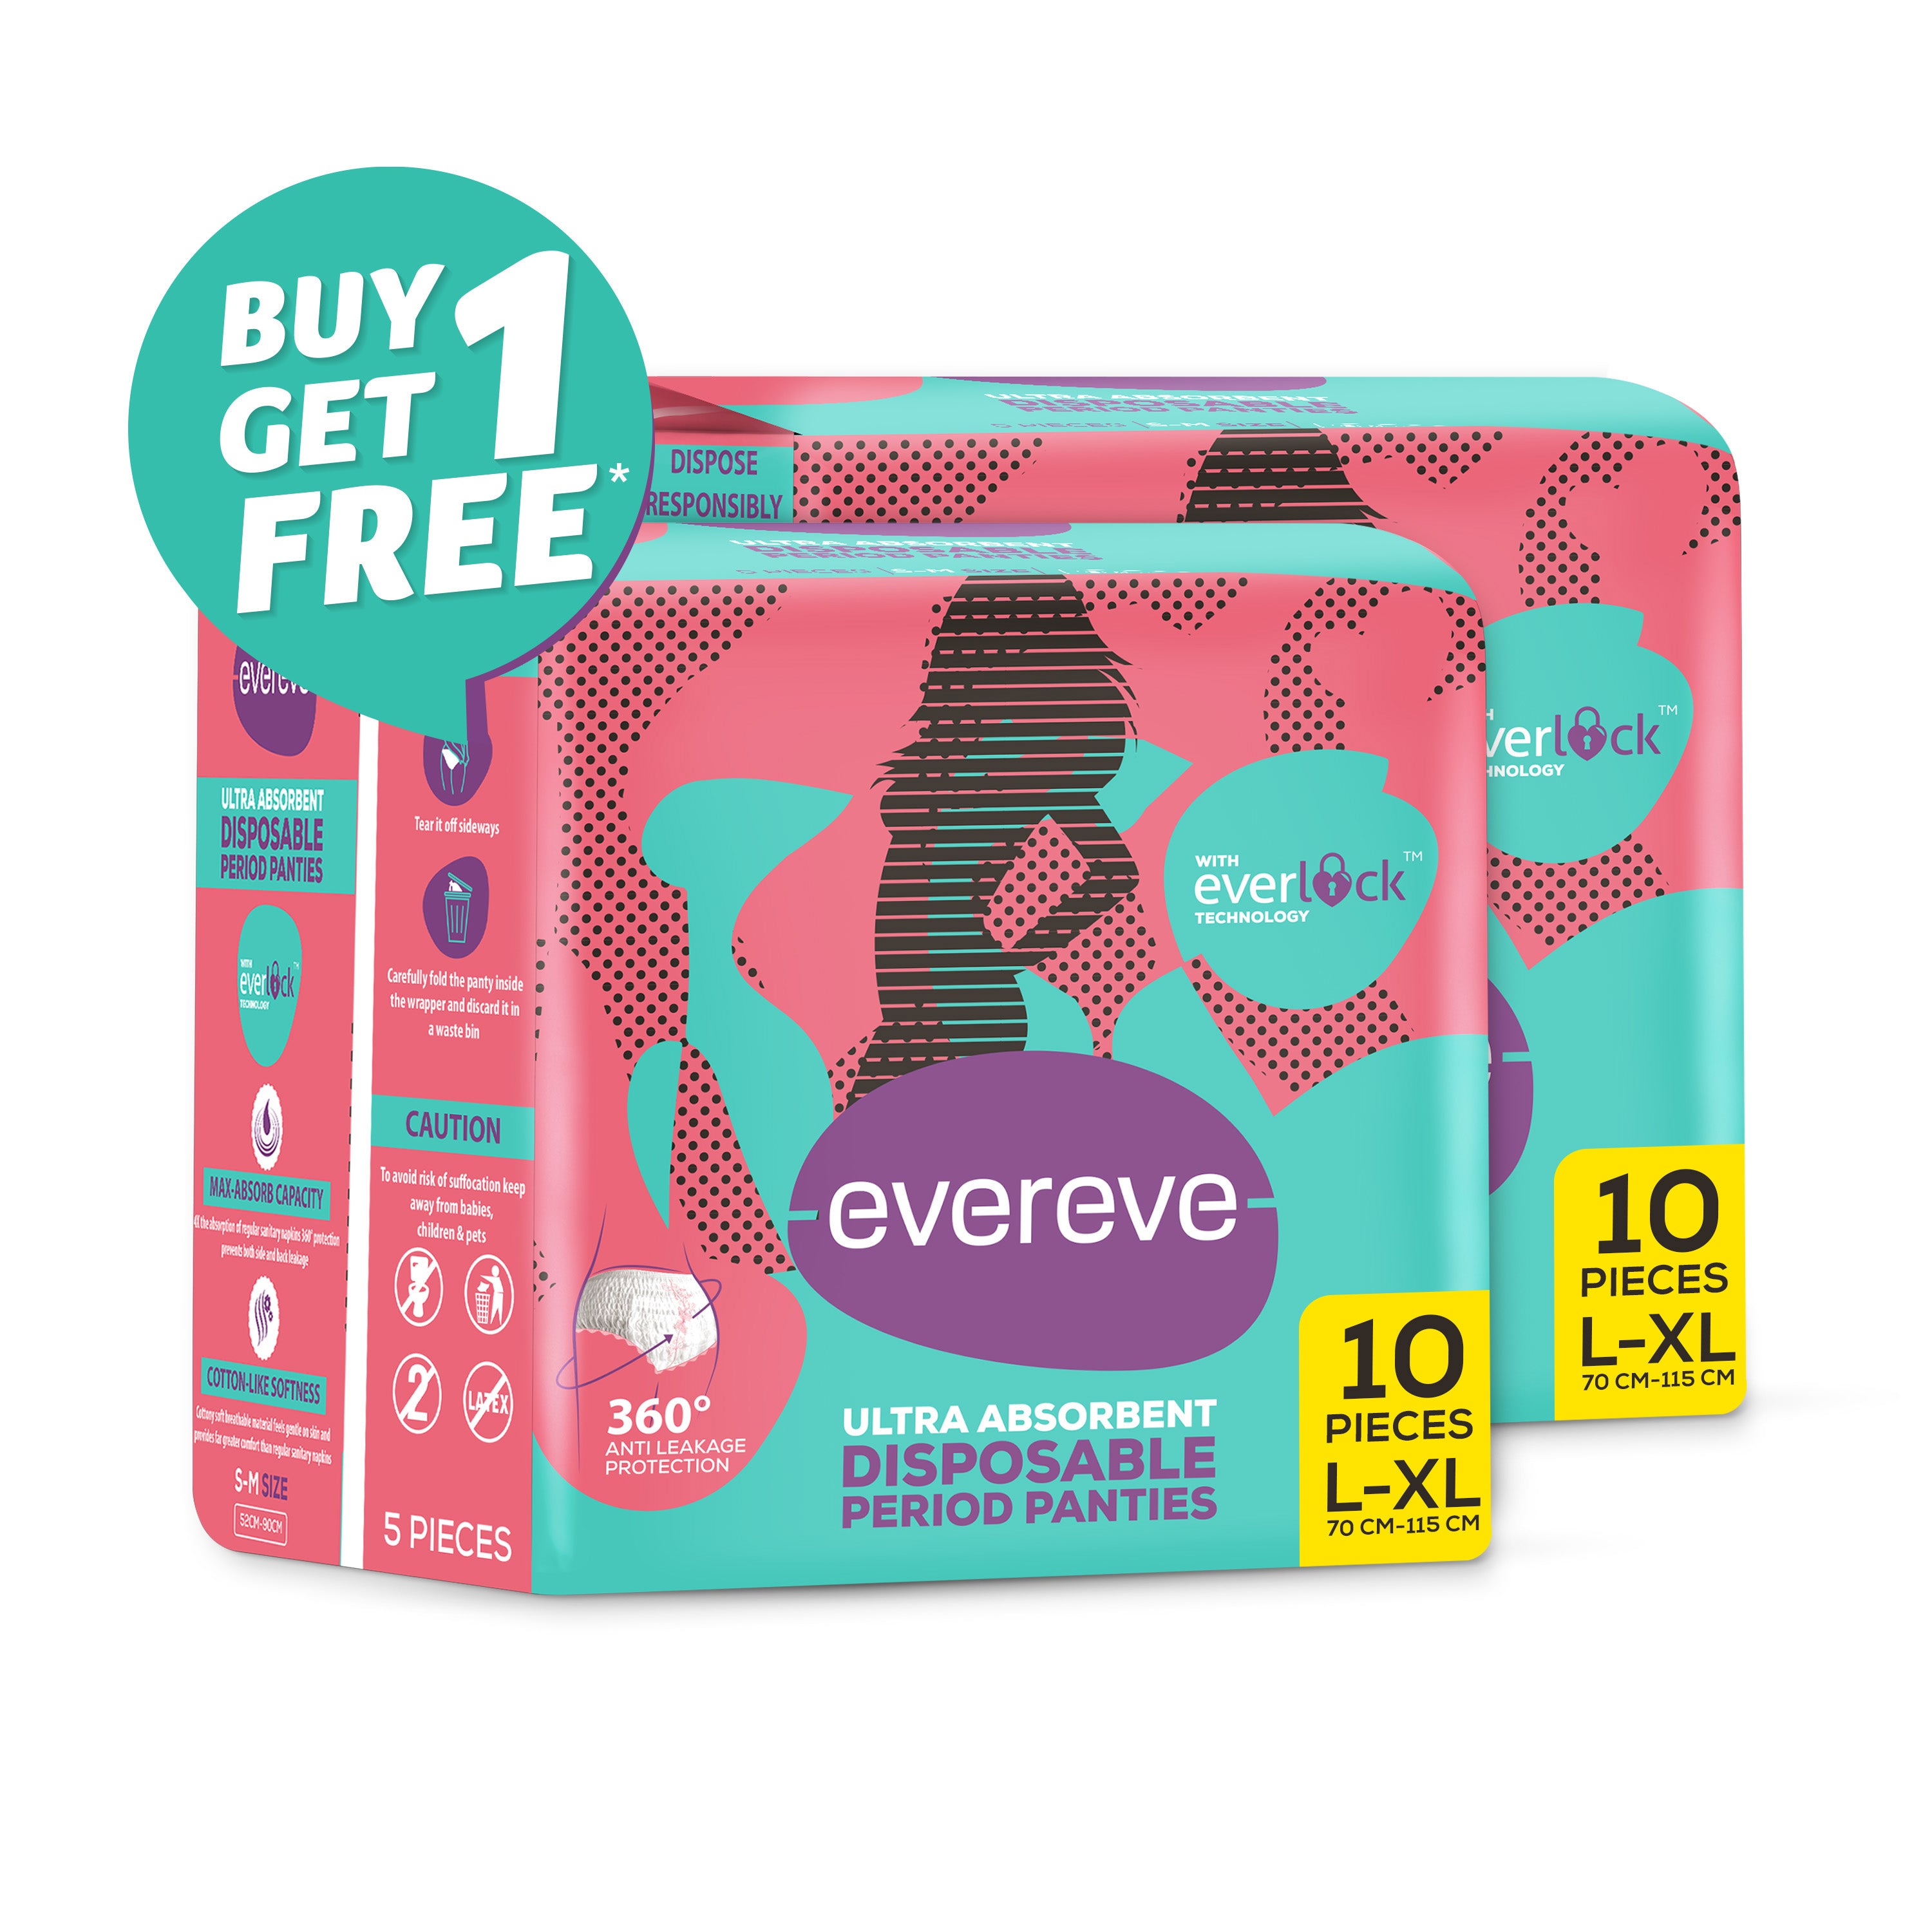 Evereve Ultra Absorbent Disposable Period Panties, L-XL, 10's Pack